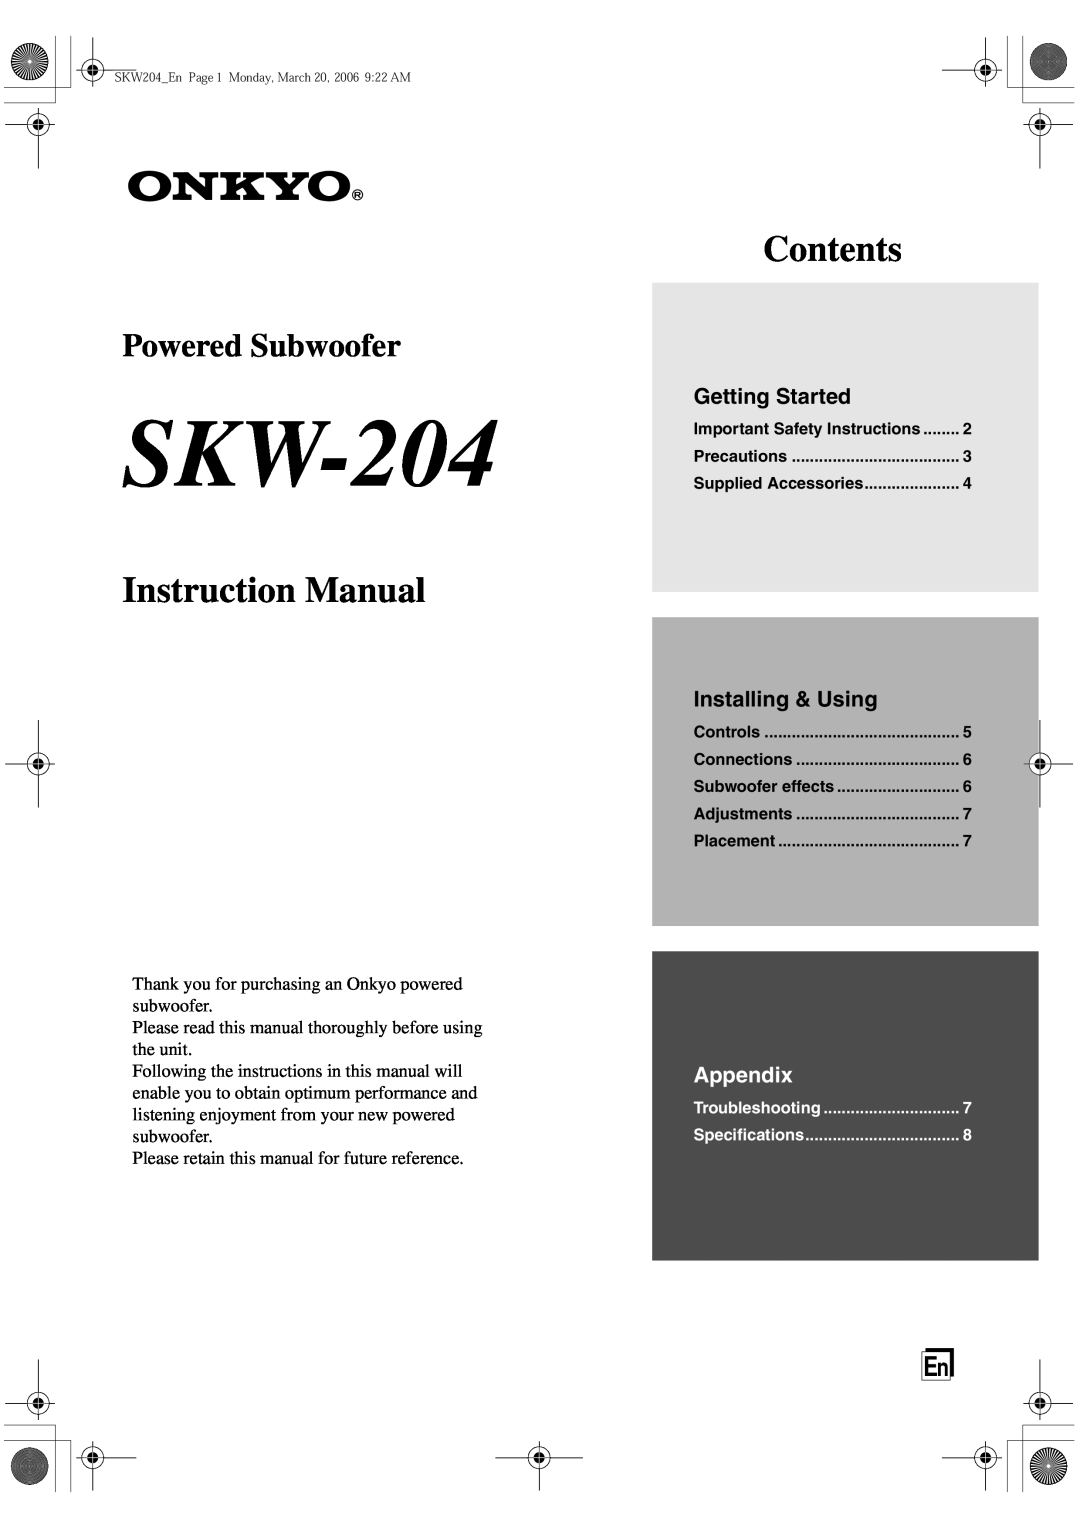 Onkyo SKW-204 instruction manual Getting Started, Installing & Using, Contents, Powered Subwoofer, Appendix 